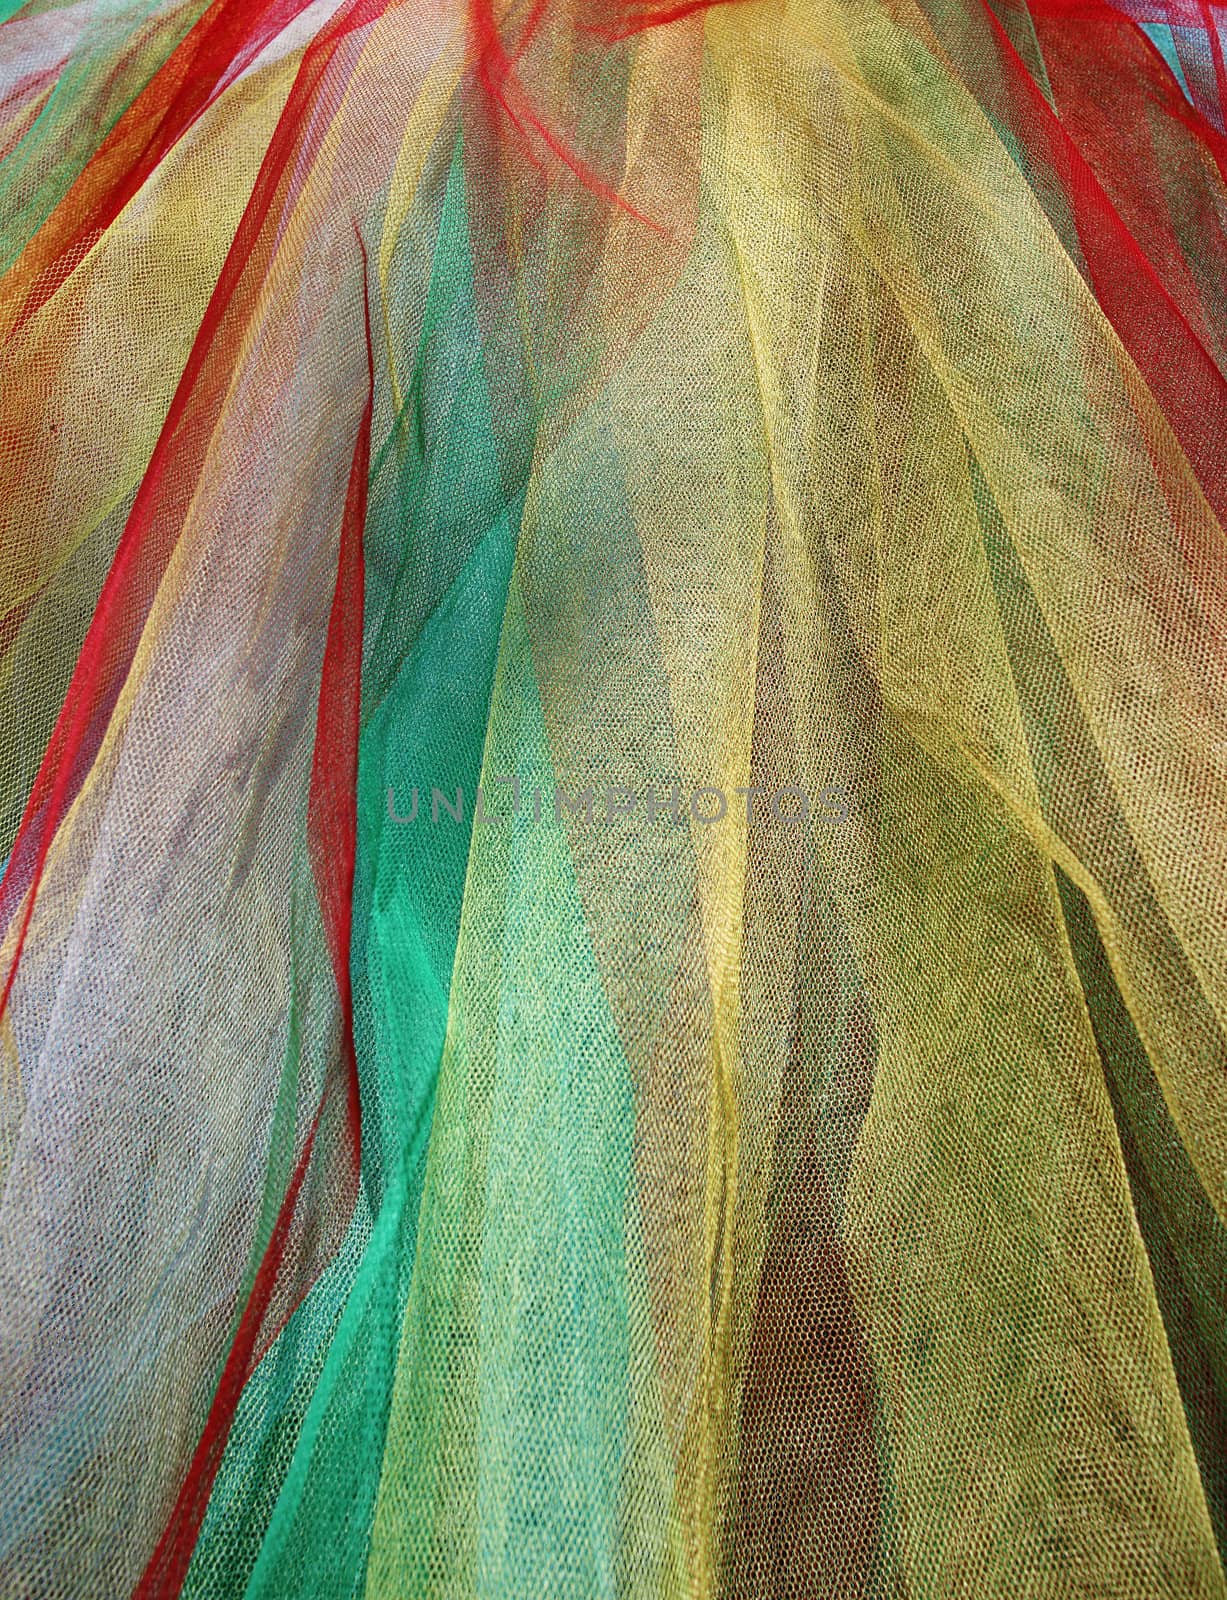 Full colored tulle composition with mixed color